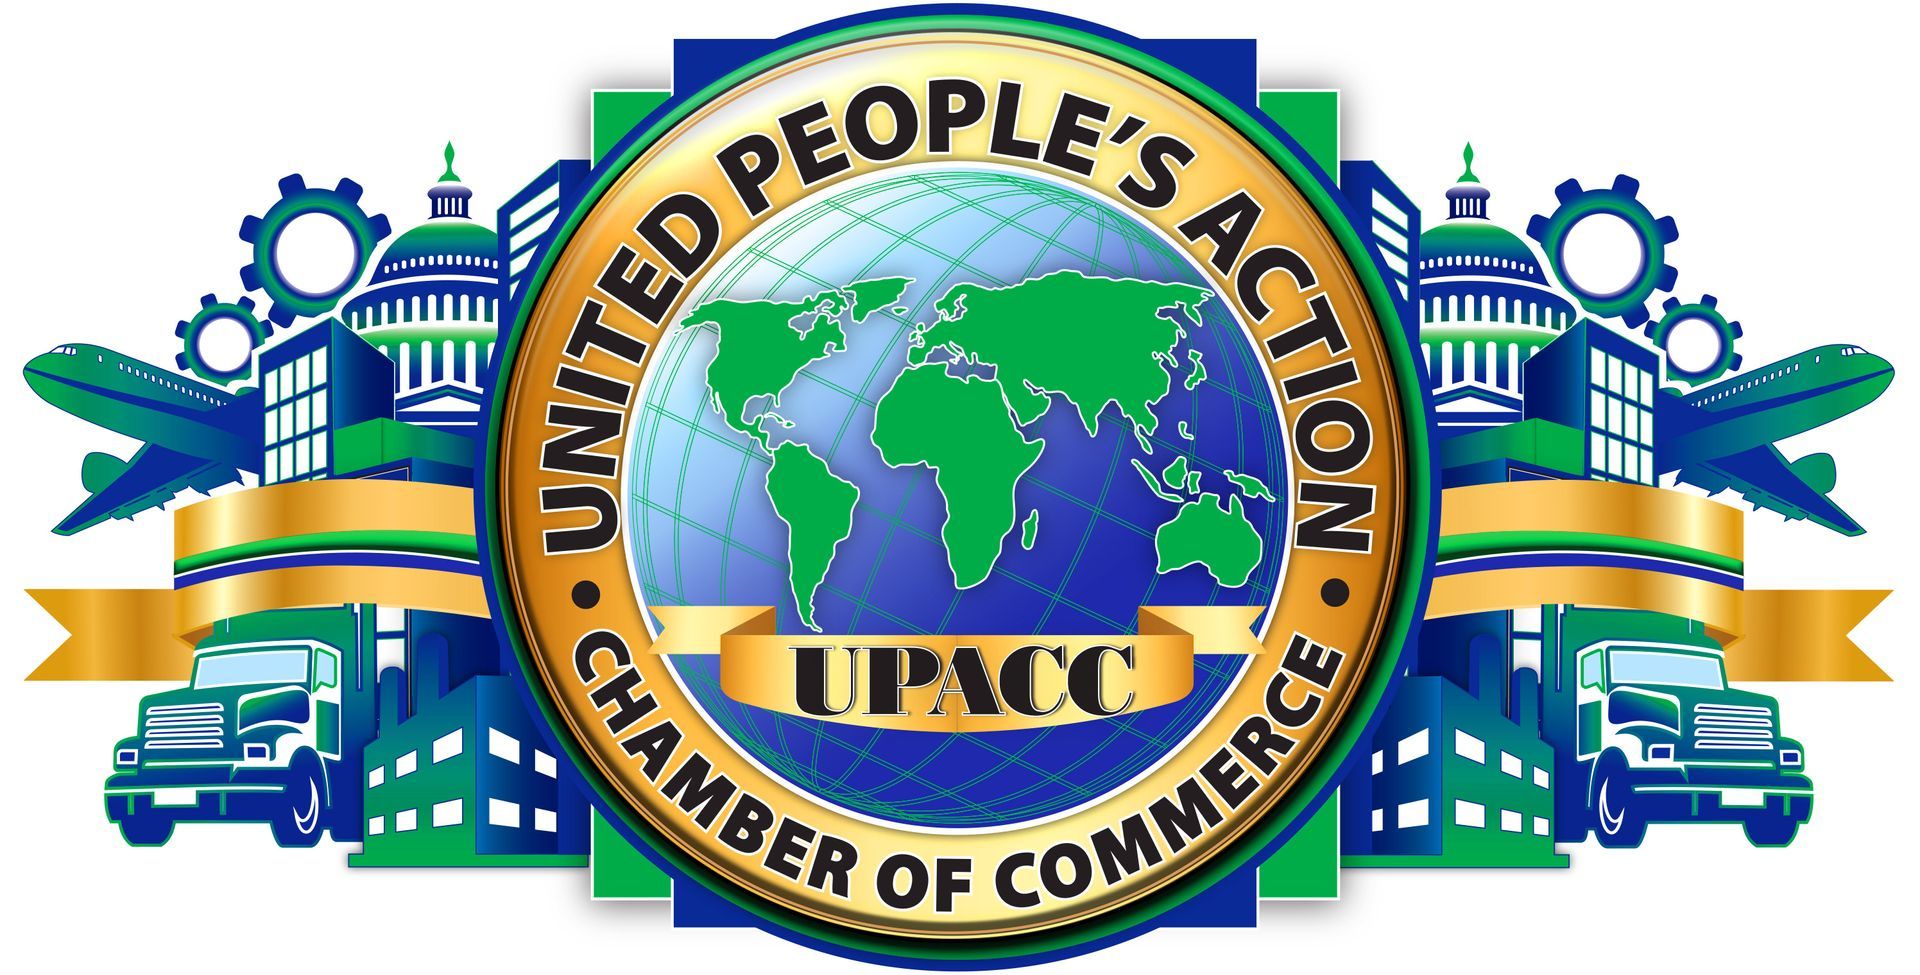 United People's Action Chamber of Commerce, Inc. (UPACC)